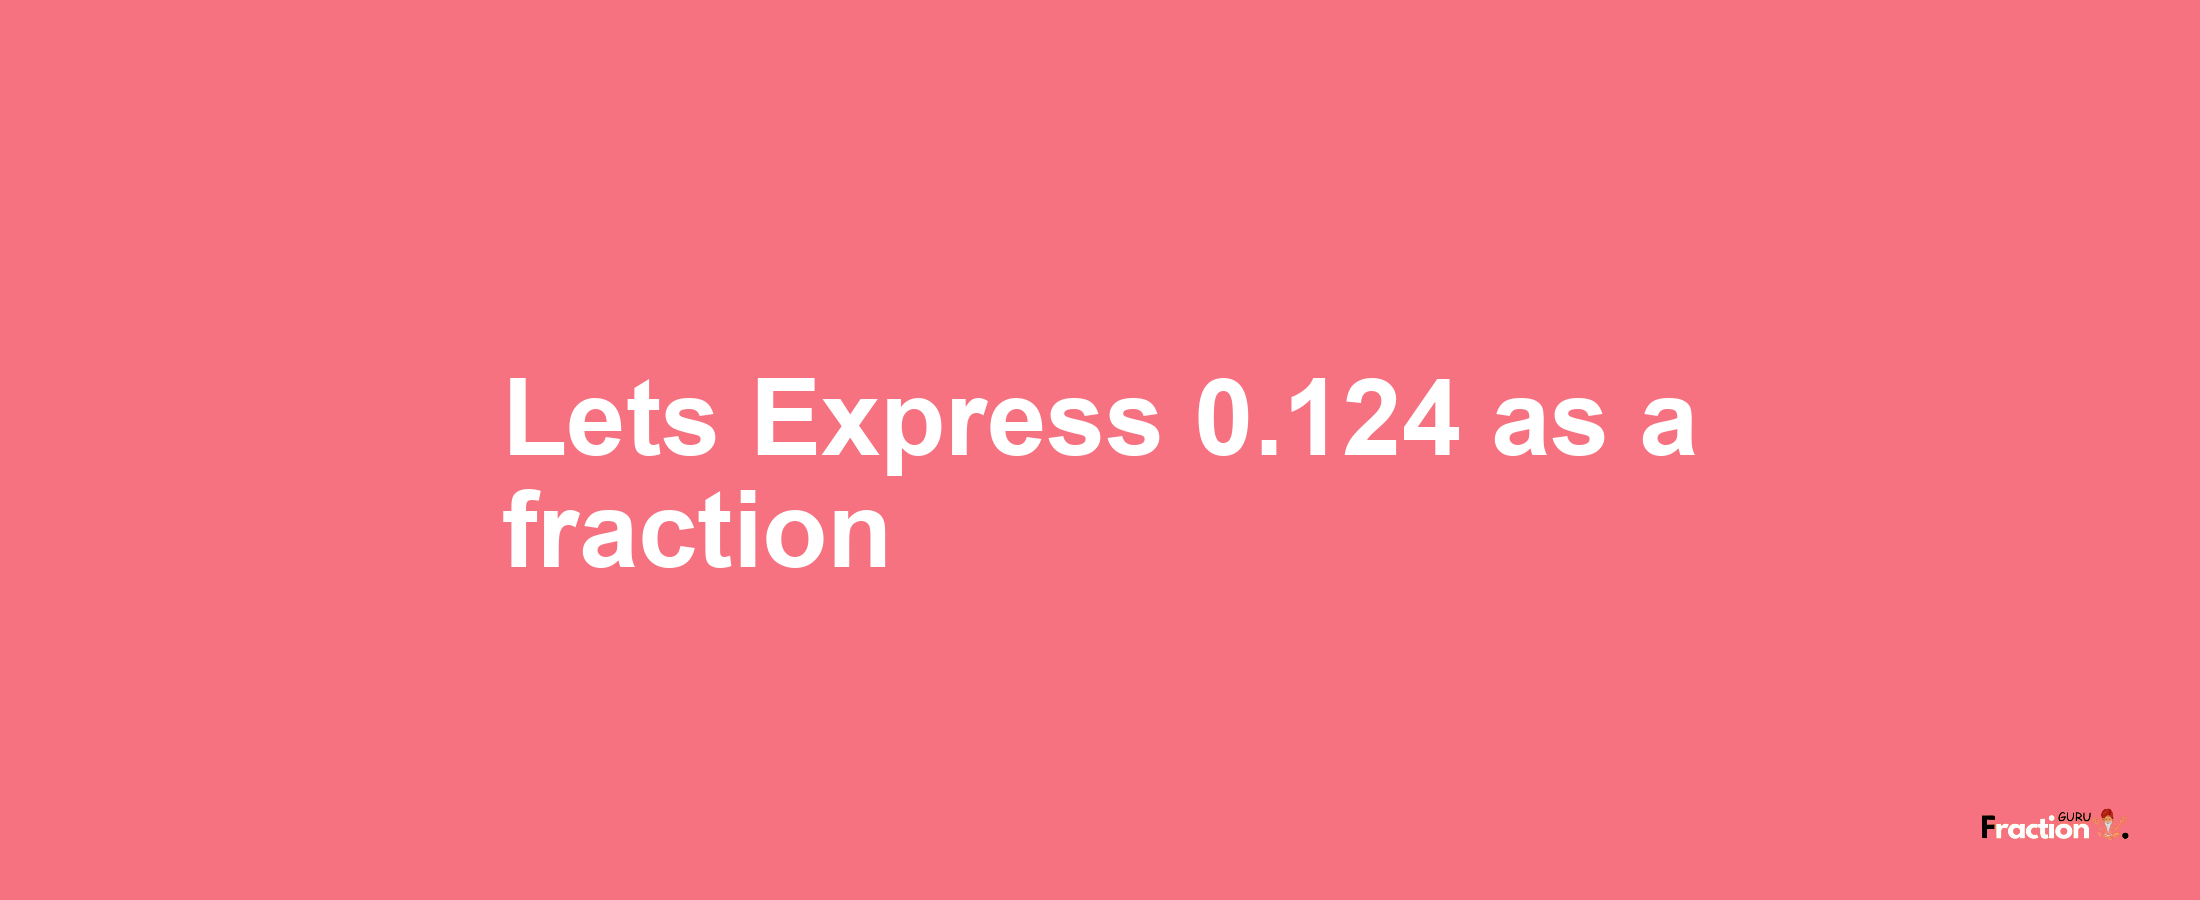 Lets Express 0.124 as afraction